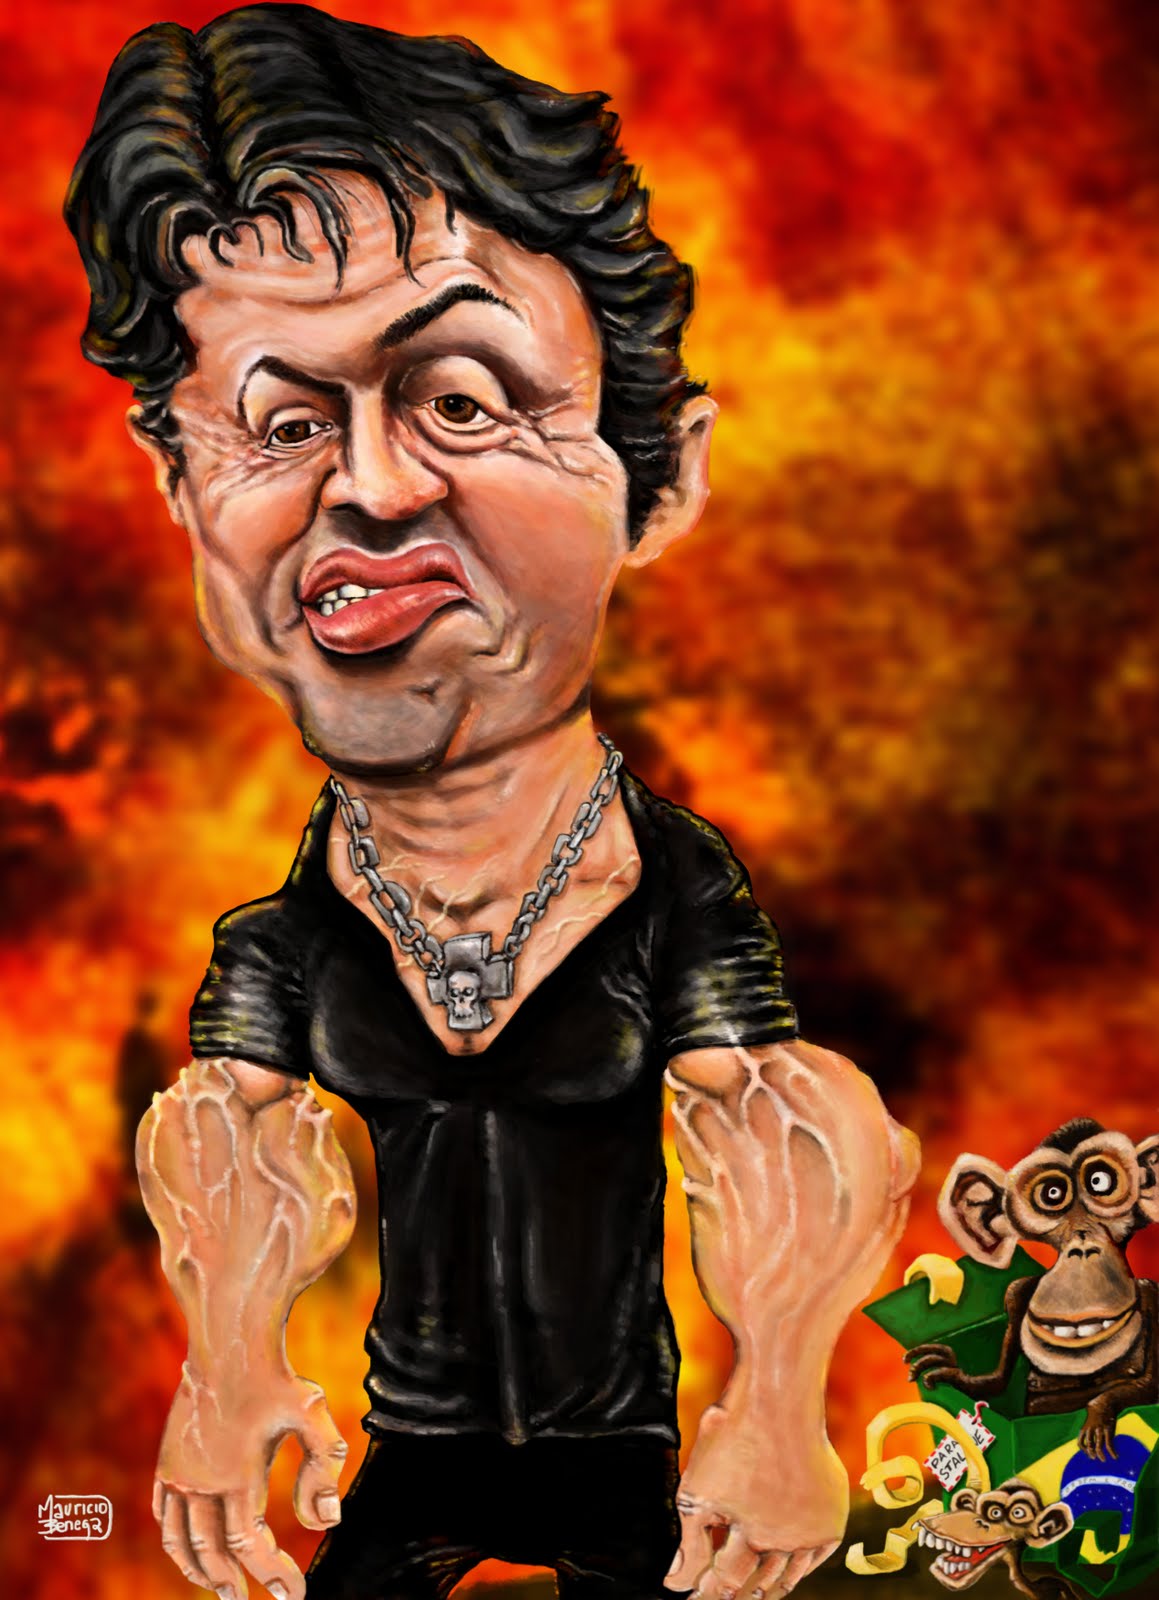 Dessins ou caricatures - Page 13 Sylvester+stallone+29